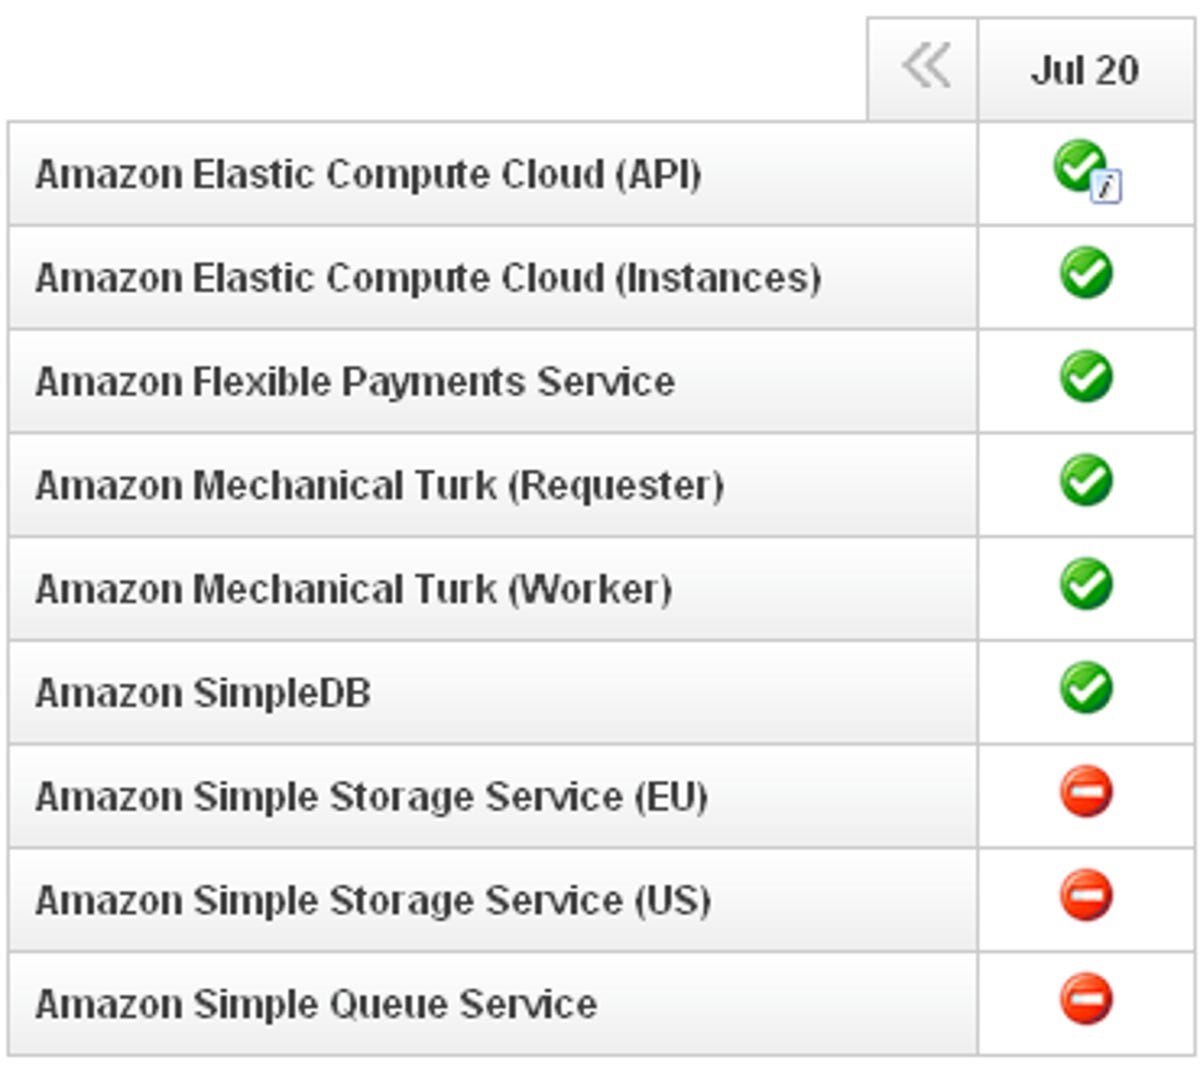 Some Amazon Web Services were down for hours on July 20.